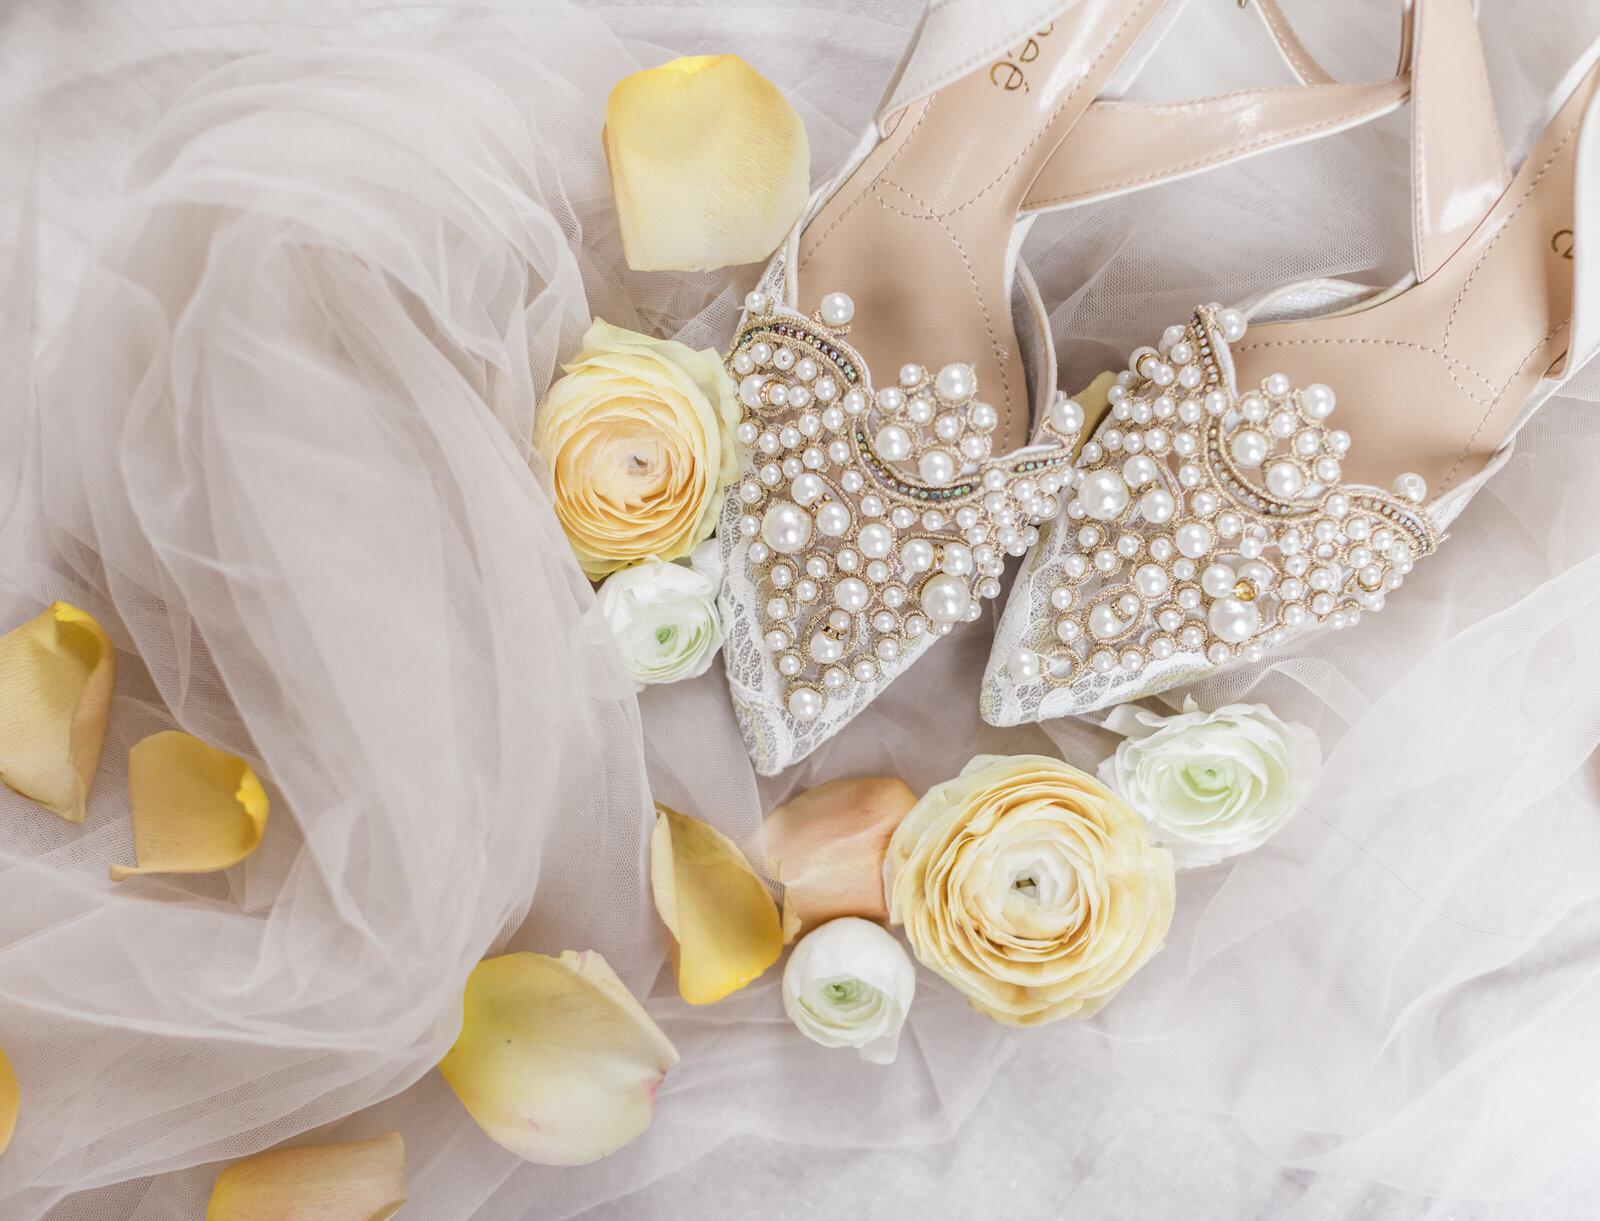 Classy High heels surrounded by yellow flowers